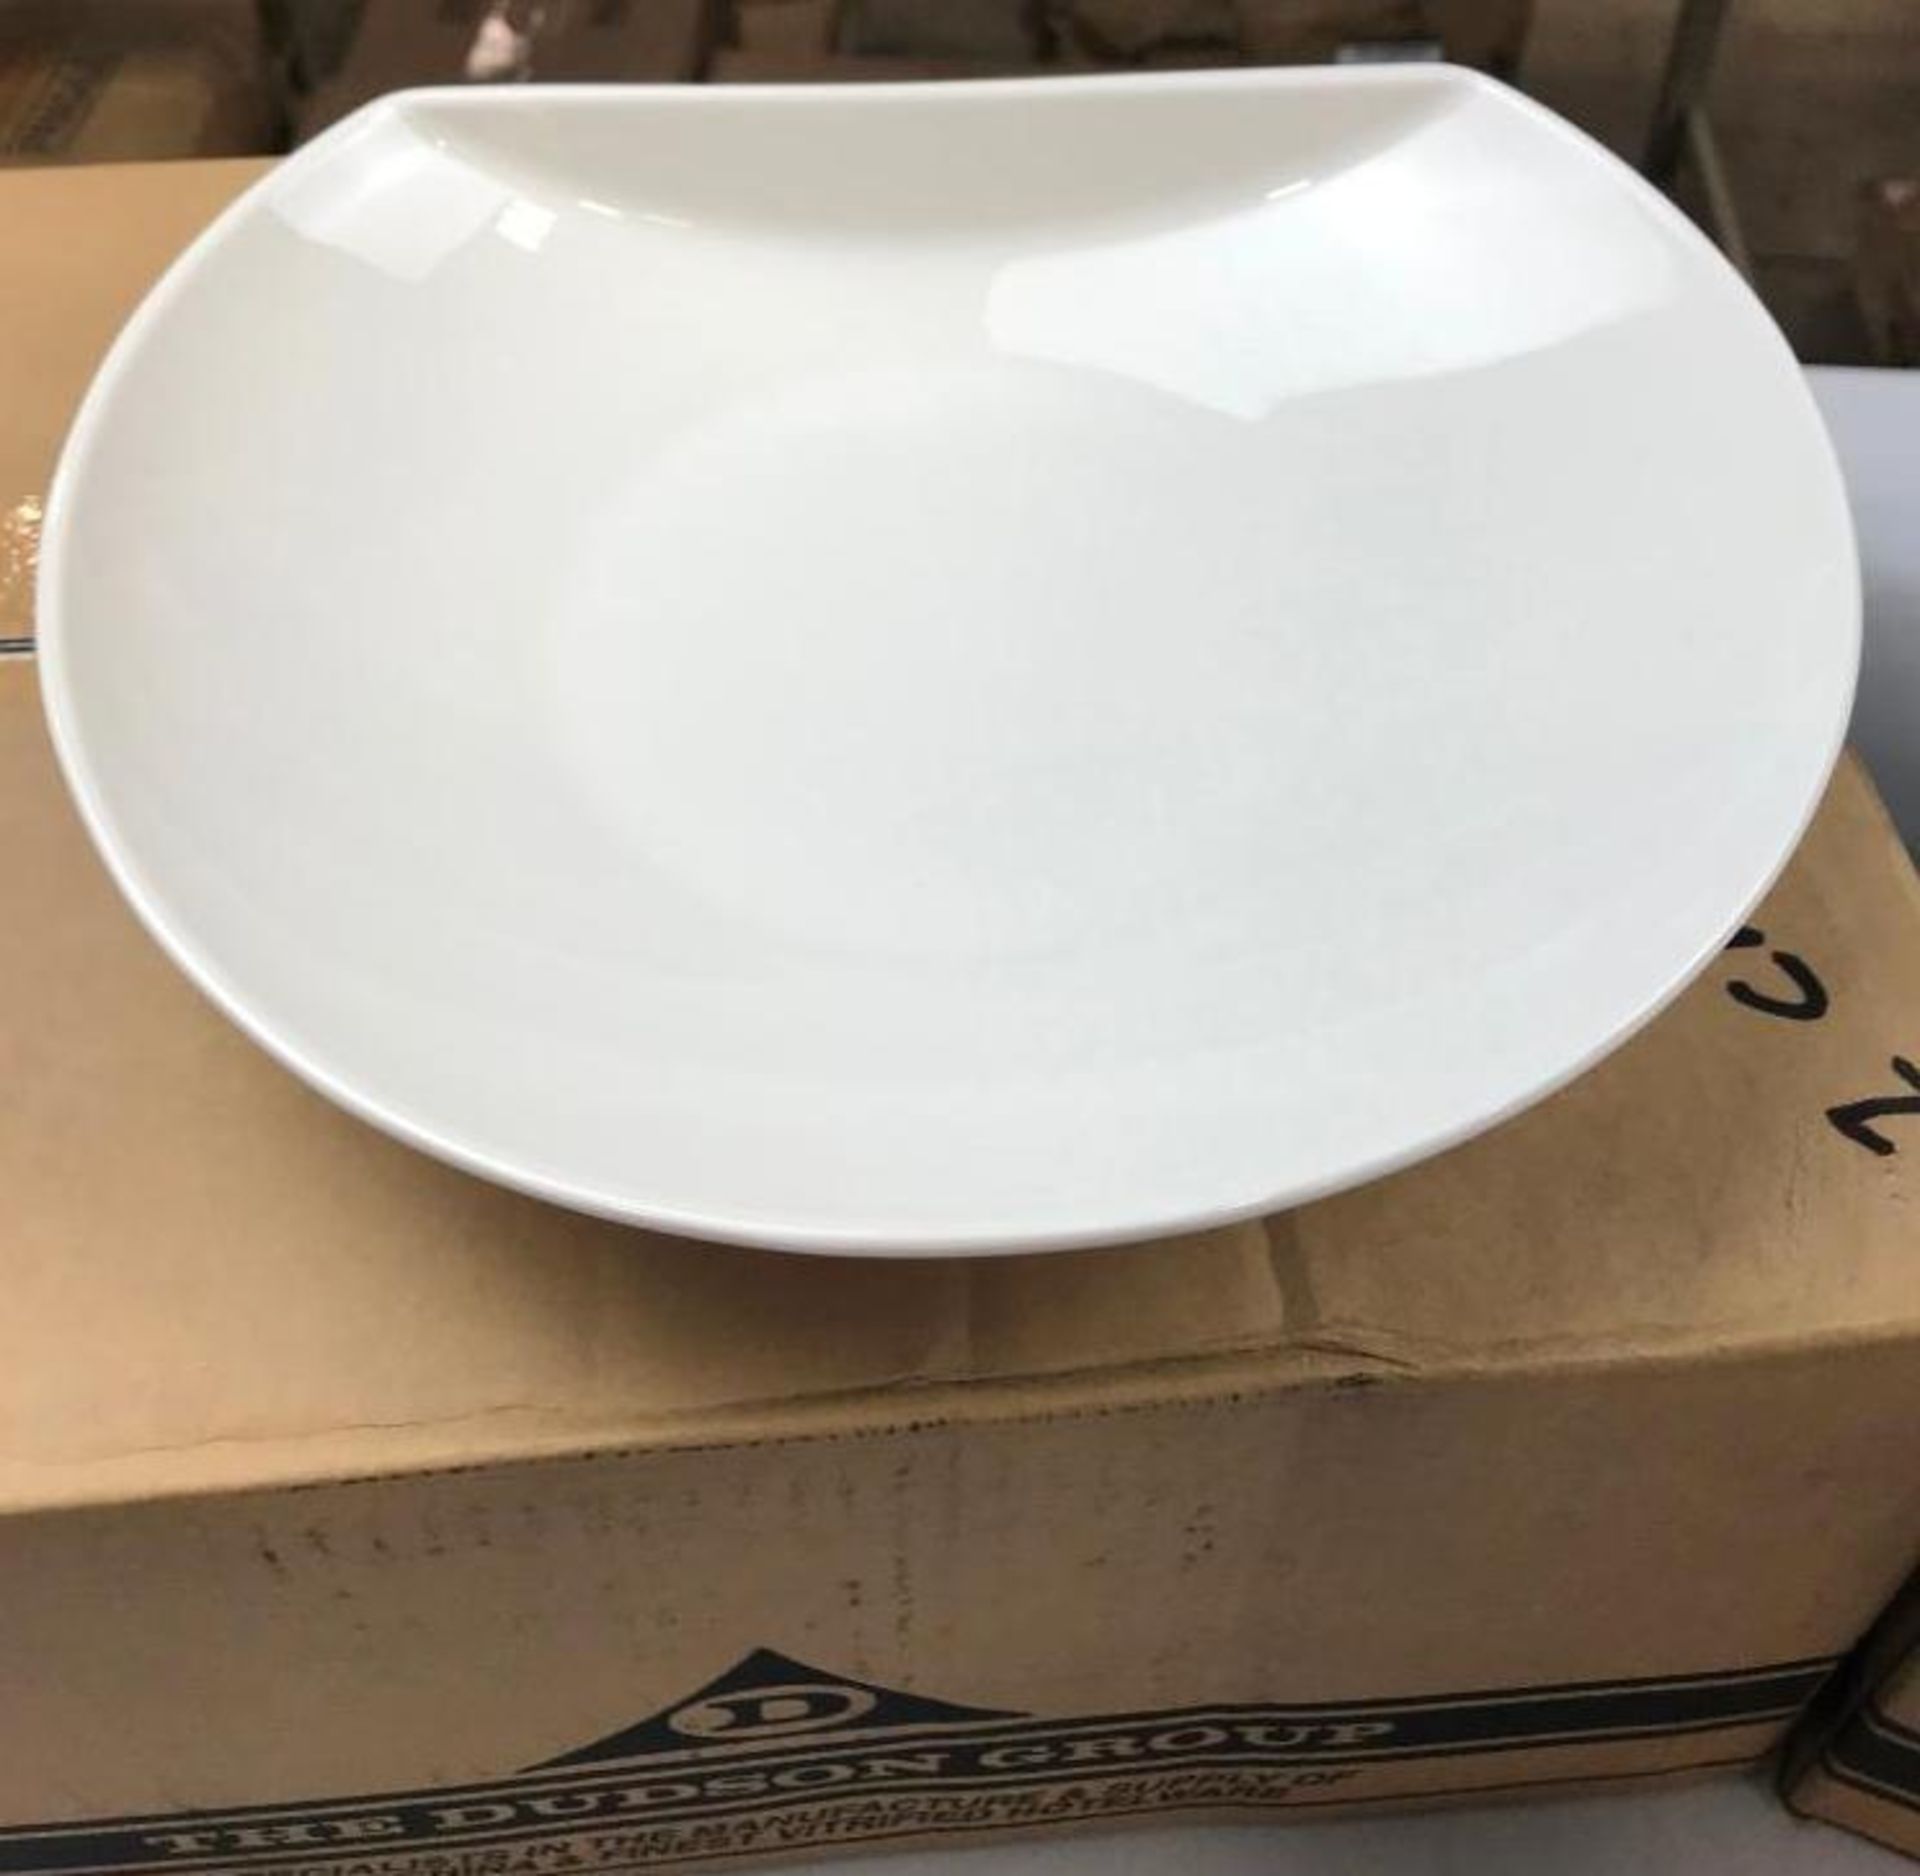 2 CASES OF DUDSON GEOMETRIX D BOWL 9.75" - 6/CASE, MADE IN ENGLAND - Image 2 of 6